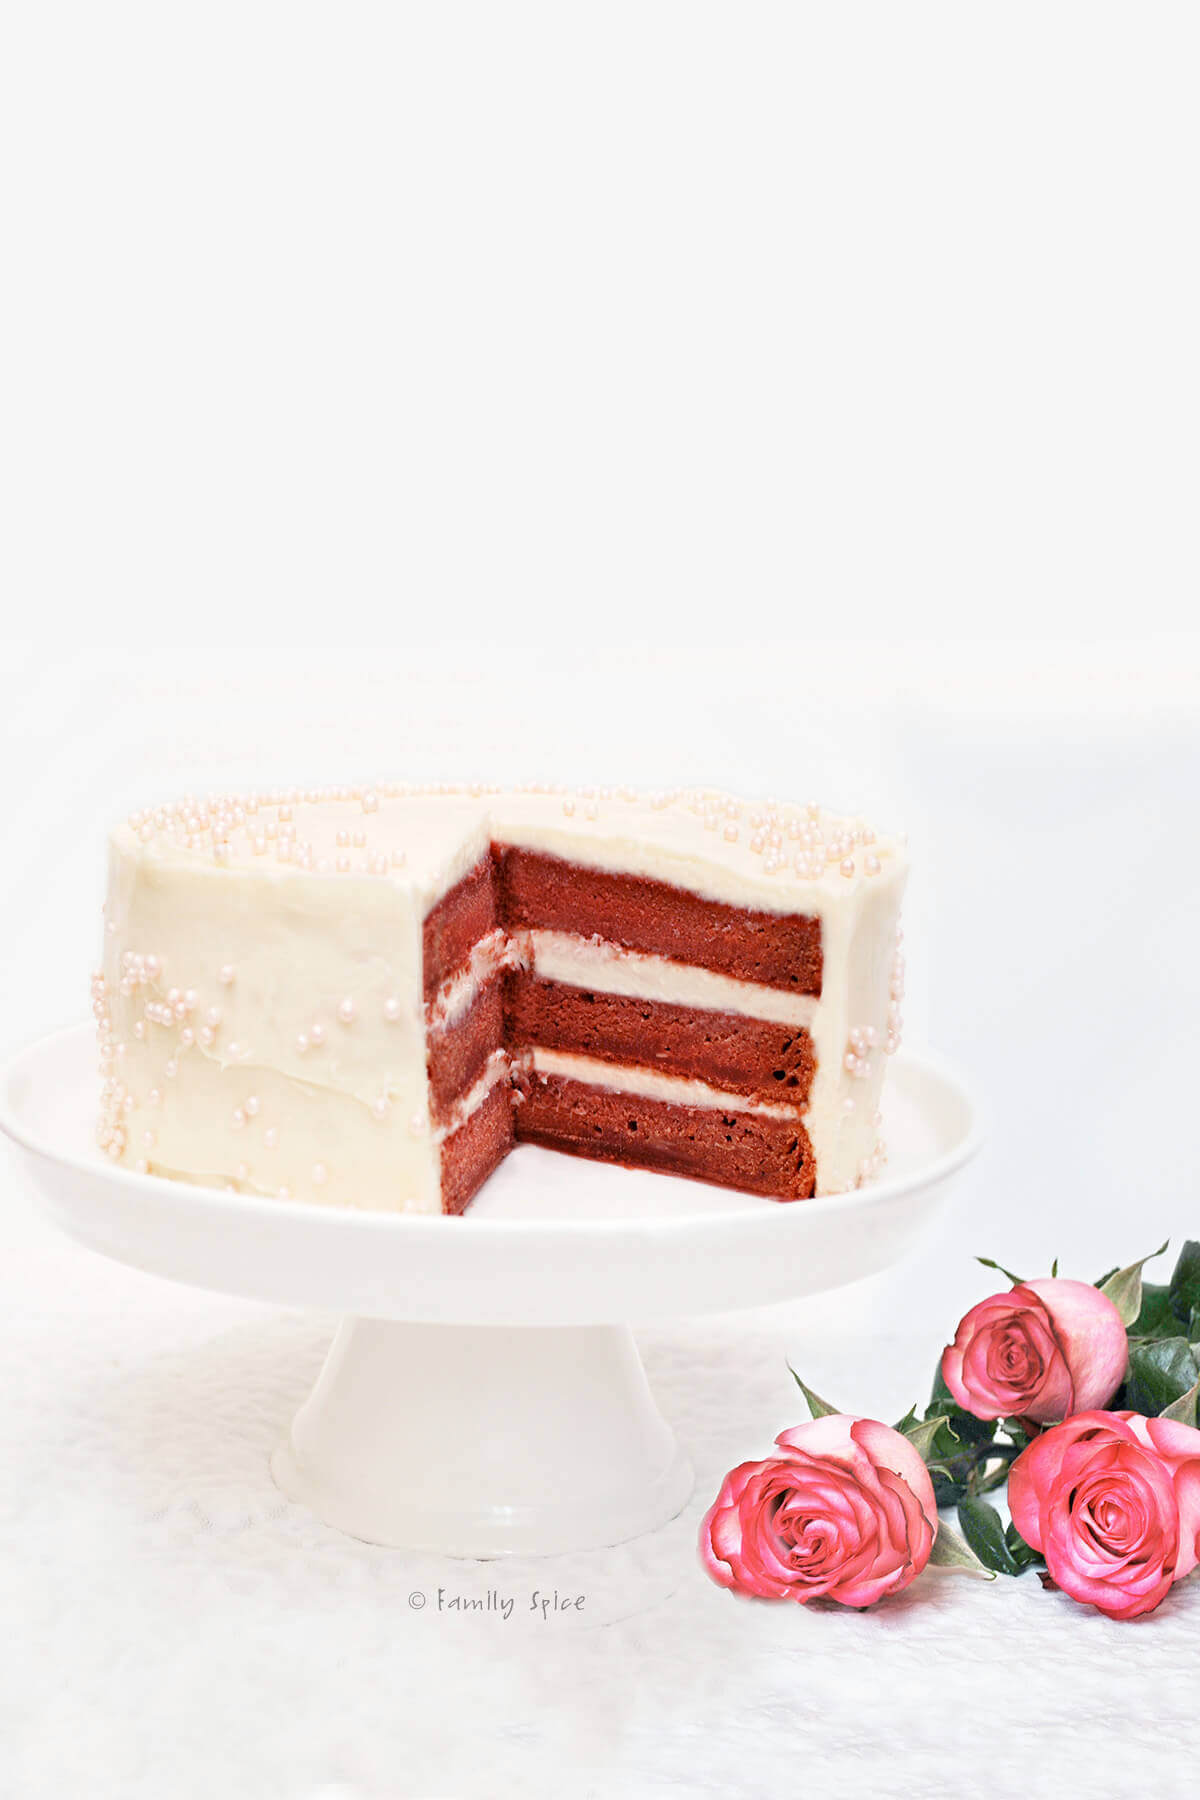 A beet red velvet cake on a white cake stand with pink roses next to it